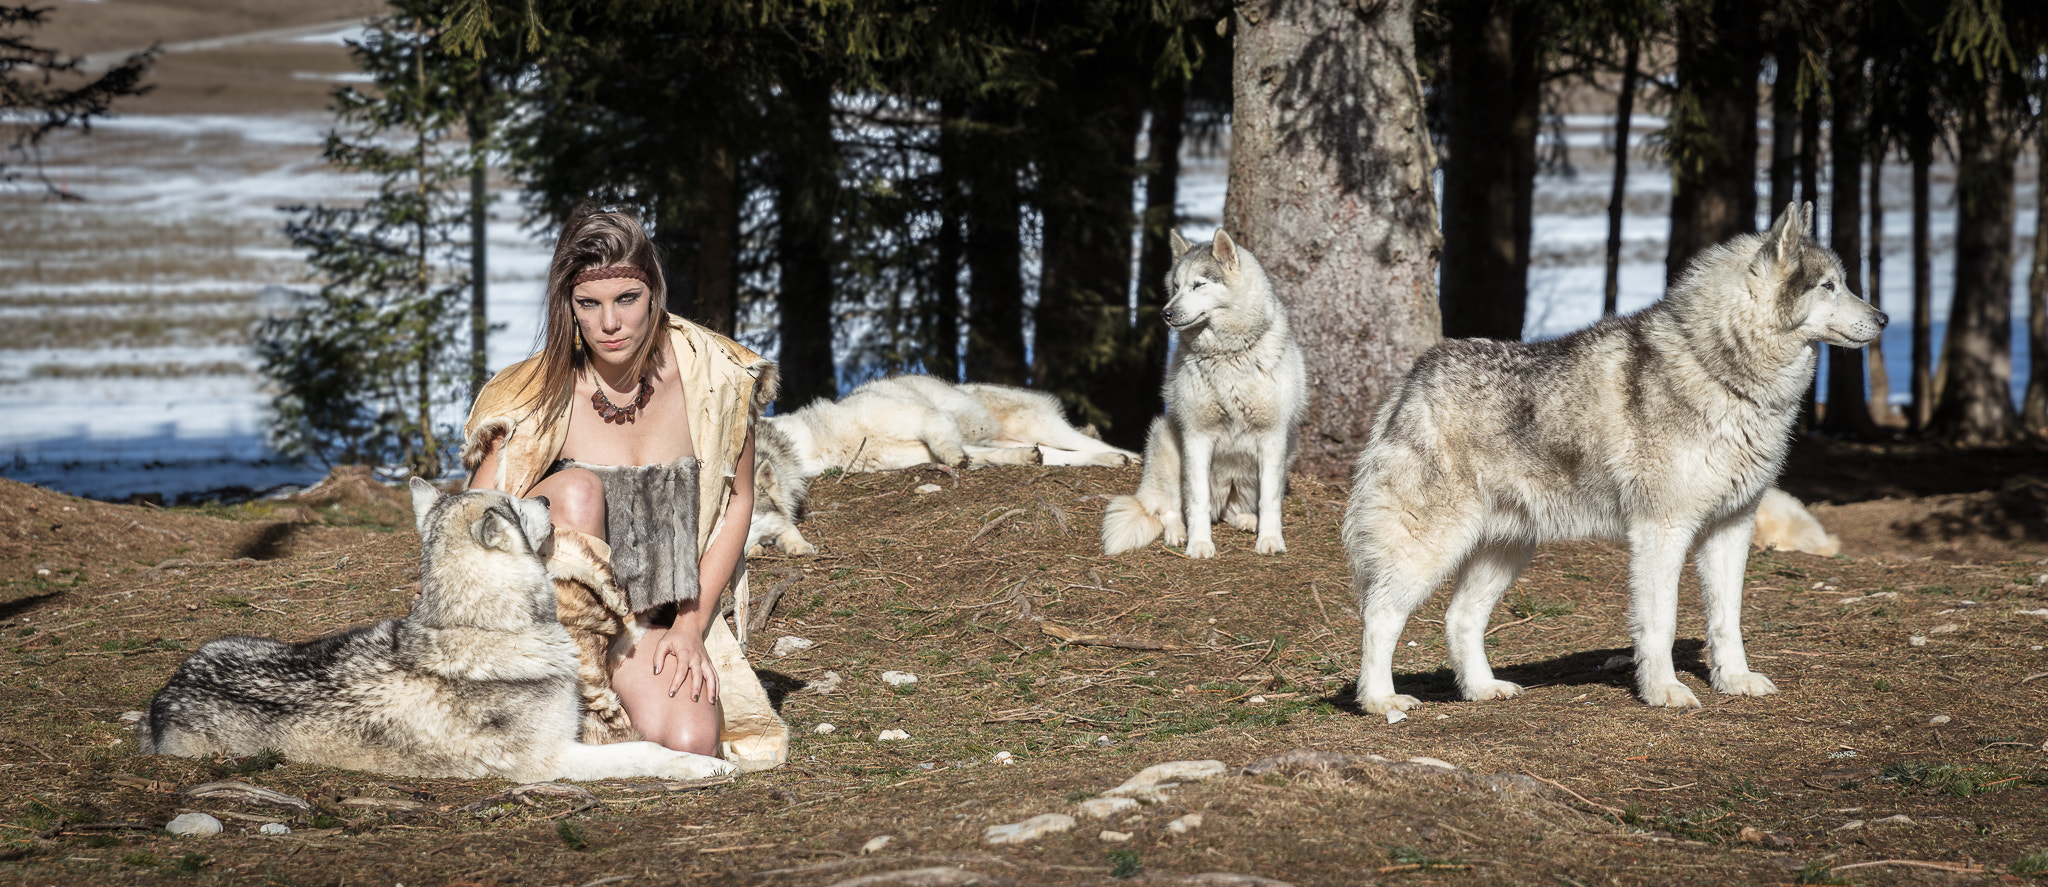 May Leyvraz 500px Fantasy Girl Animals Women Outdoors Nature Dog Wolf Women With Dogs 2048x887